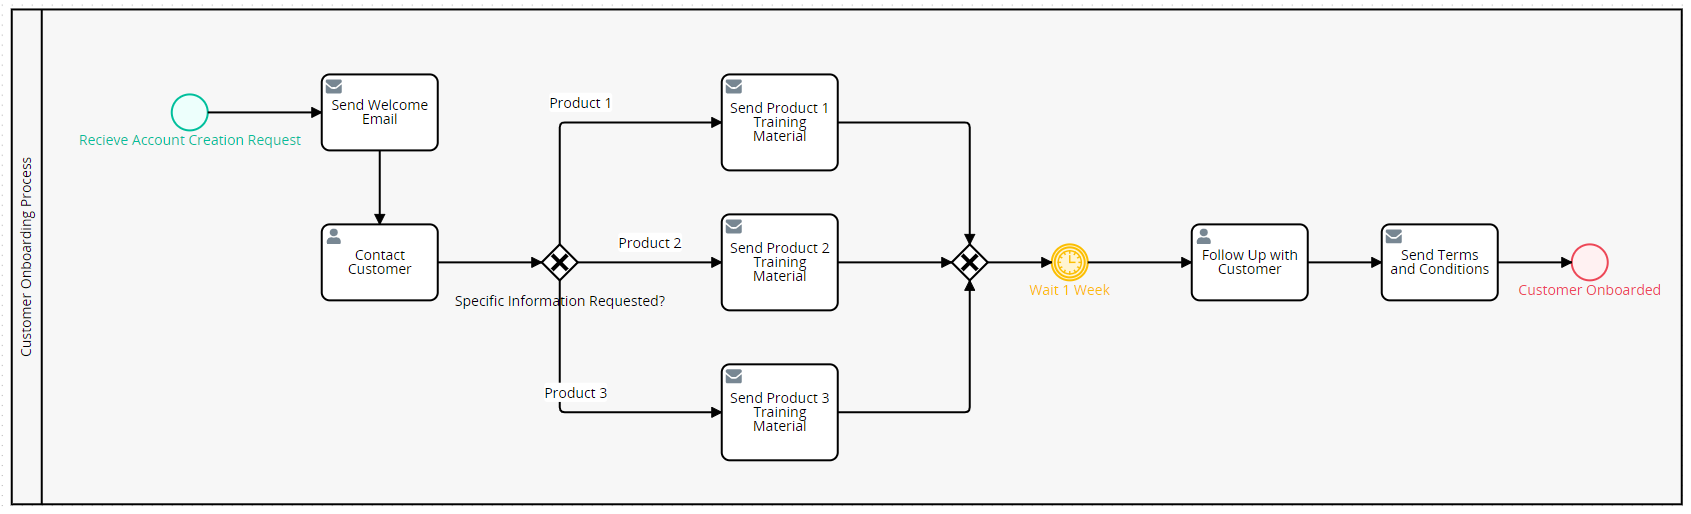 process map example